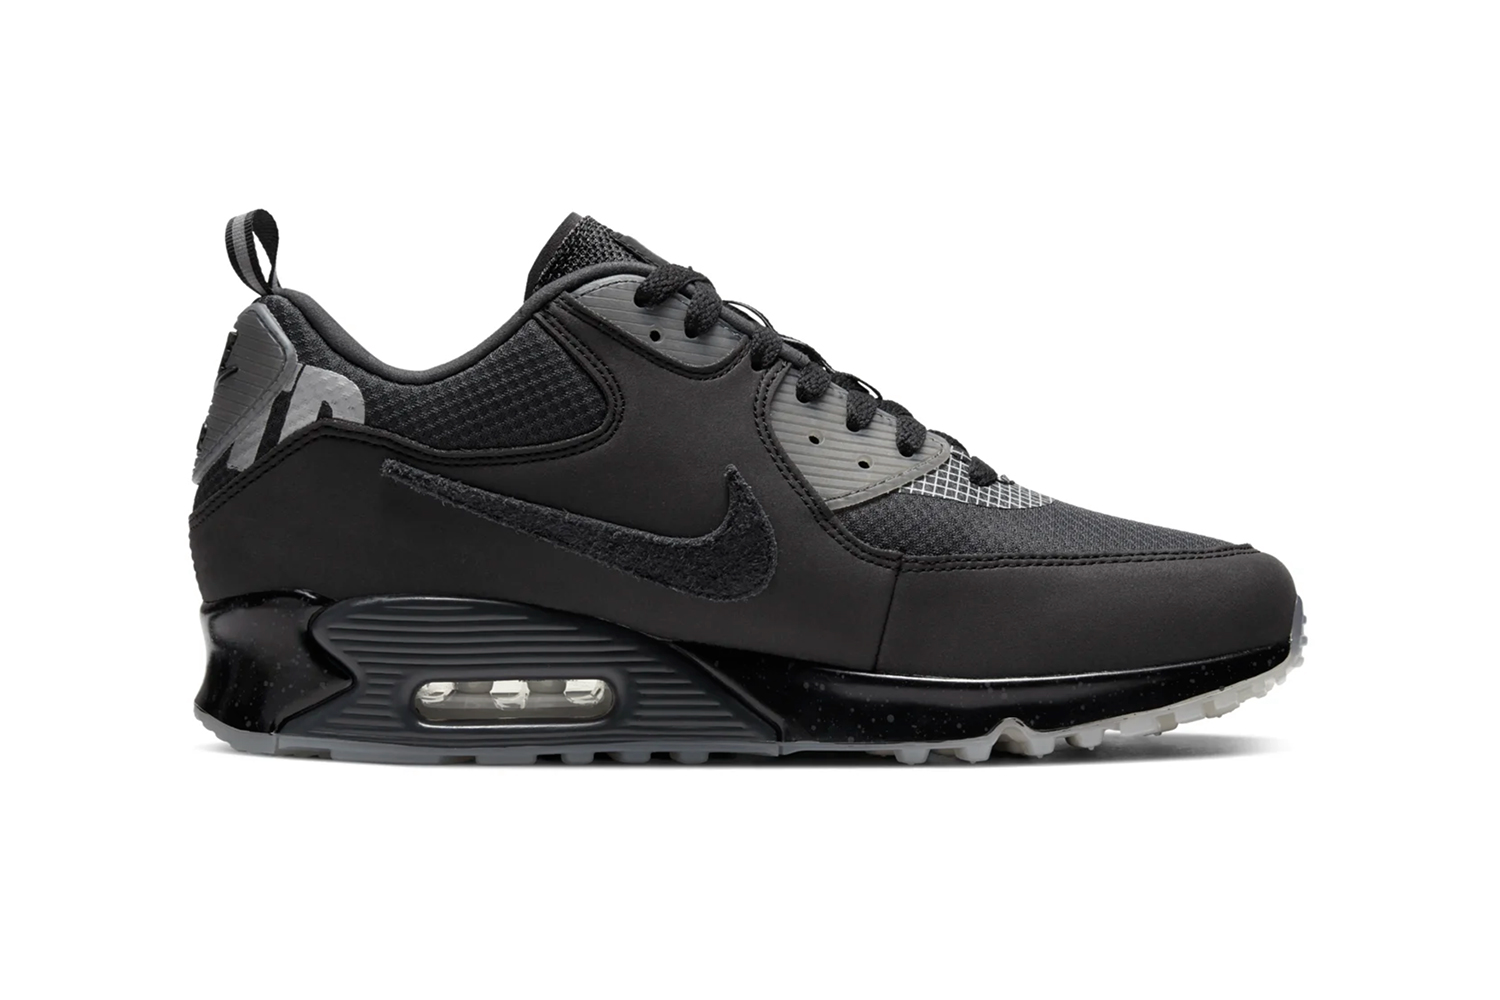 UNDEFEATED x Nike Air Max 90 Black/Black | Drops | Hypebeast